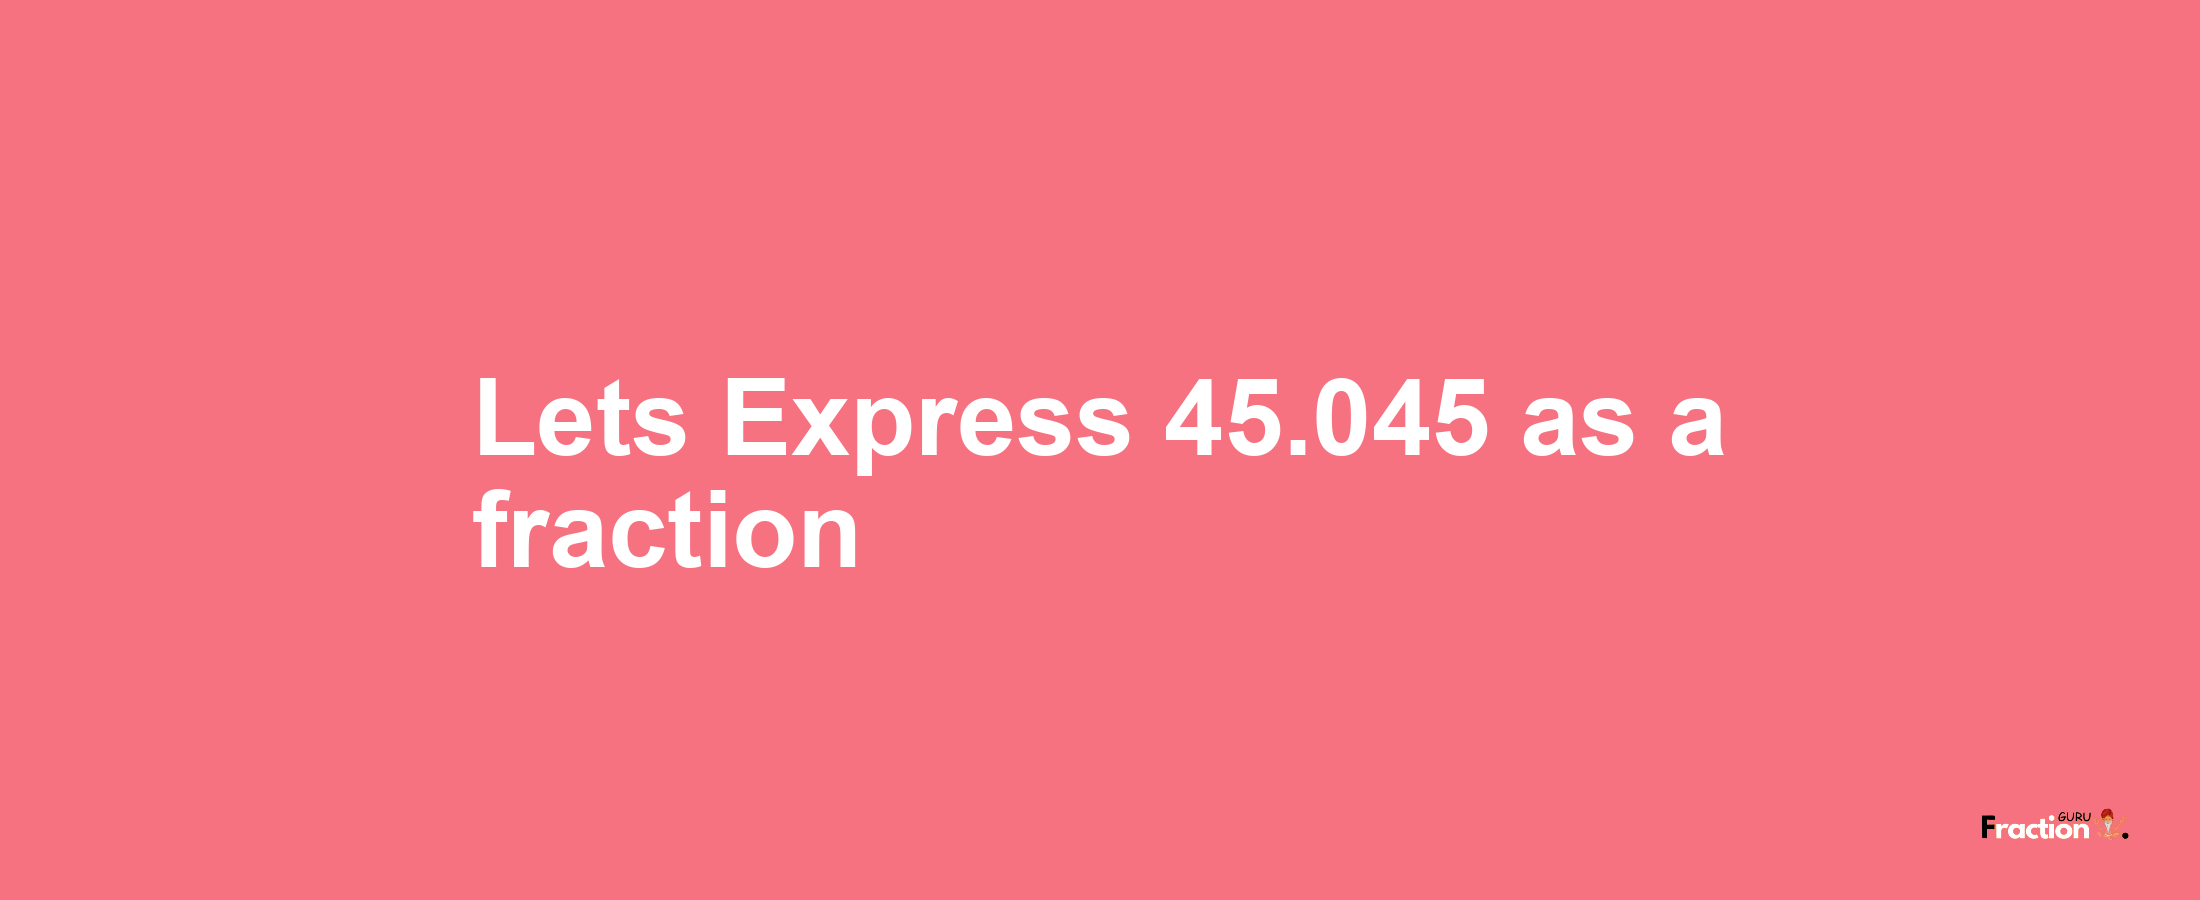 Lets Express 45.045 as afraction